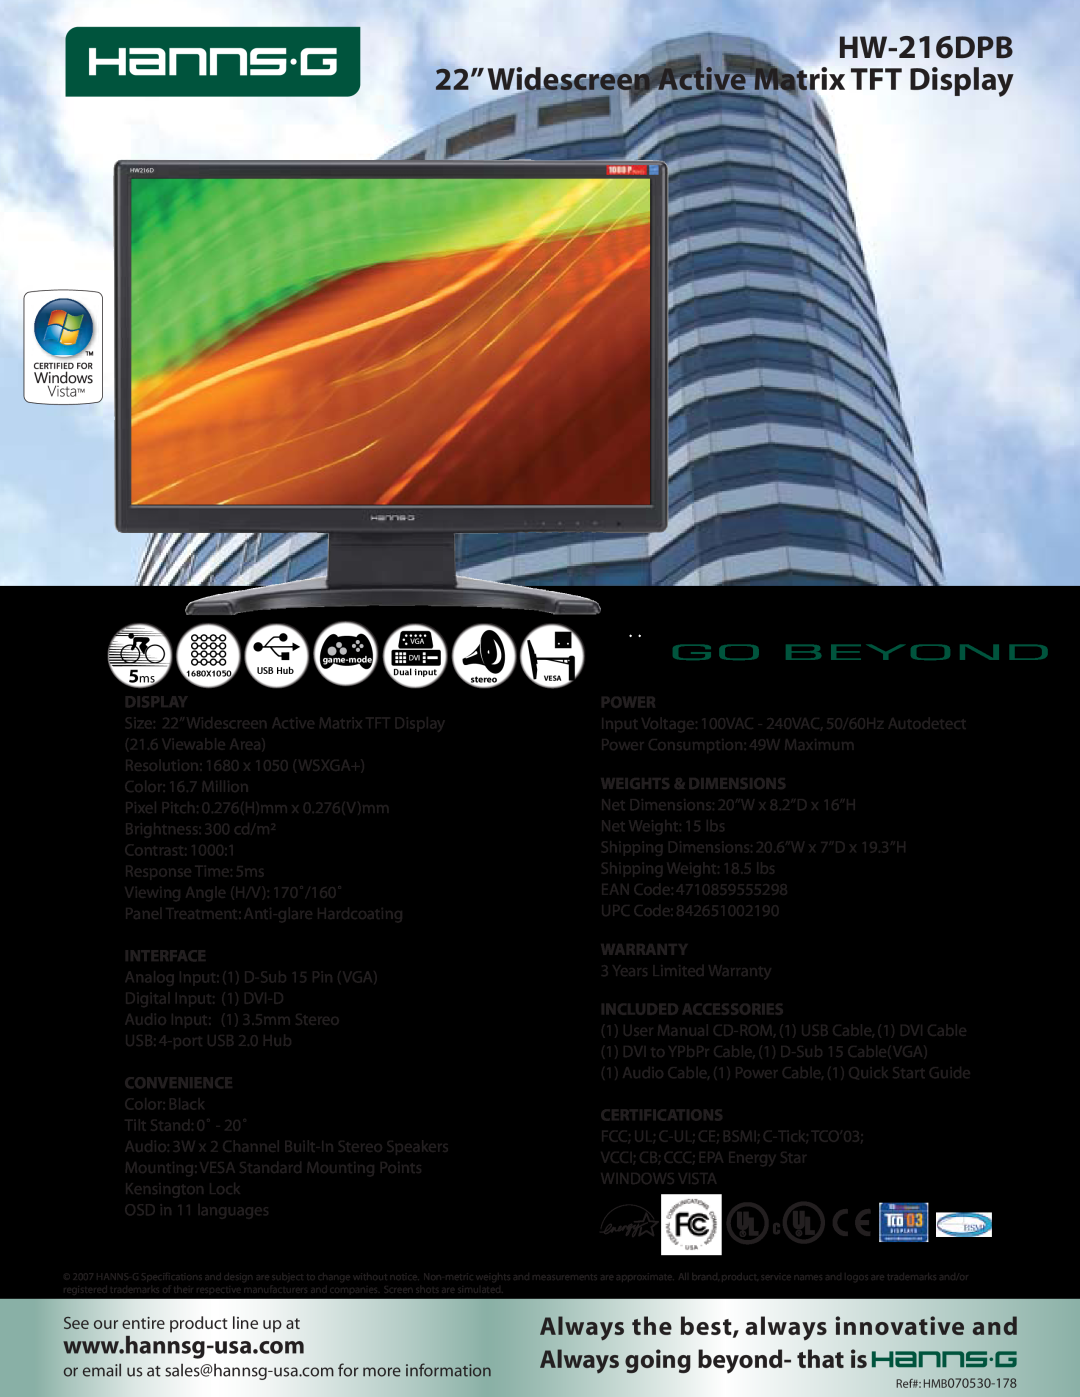 Hanns.G dimensions HW-216DPB 22”Widescreen Active Matrix TFT Display, Power, Weights & Dimensions, Interface, Warranty 